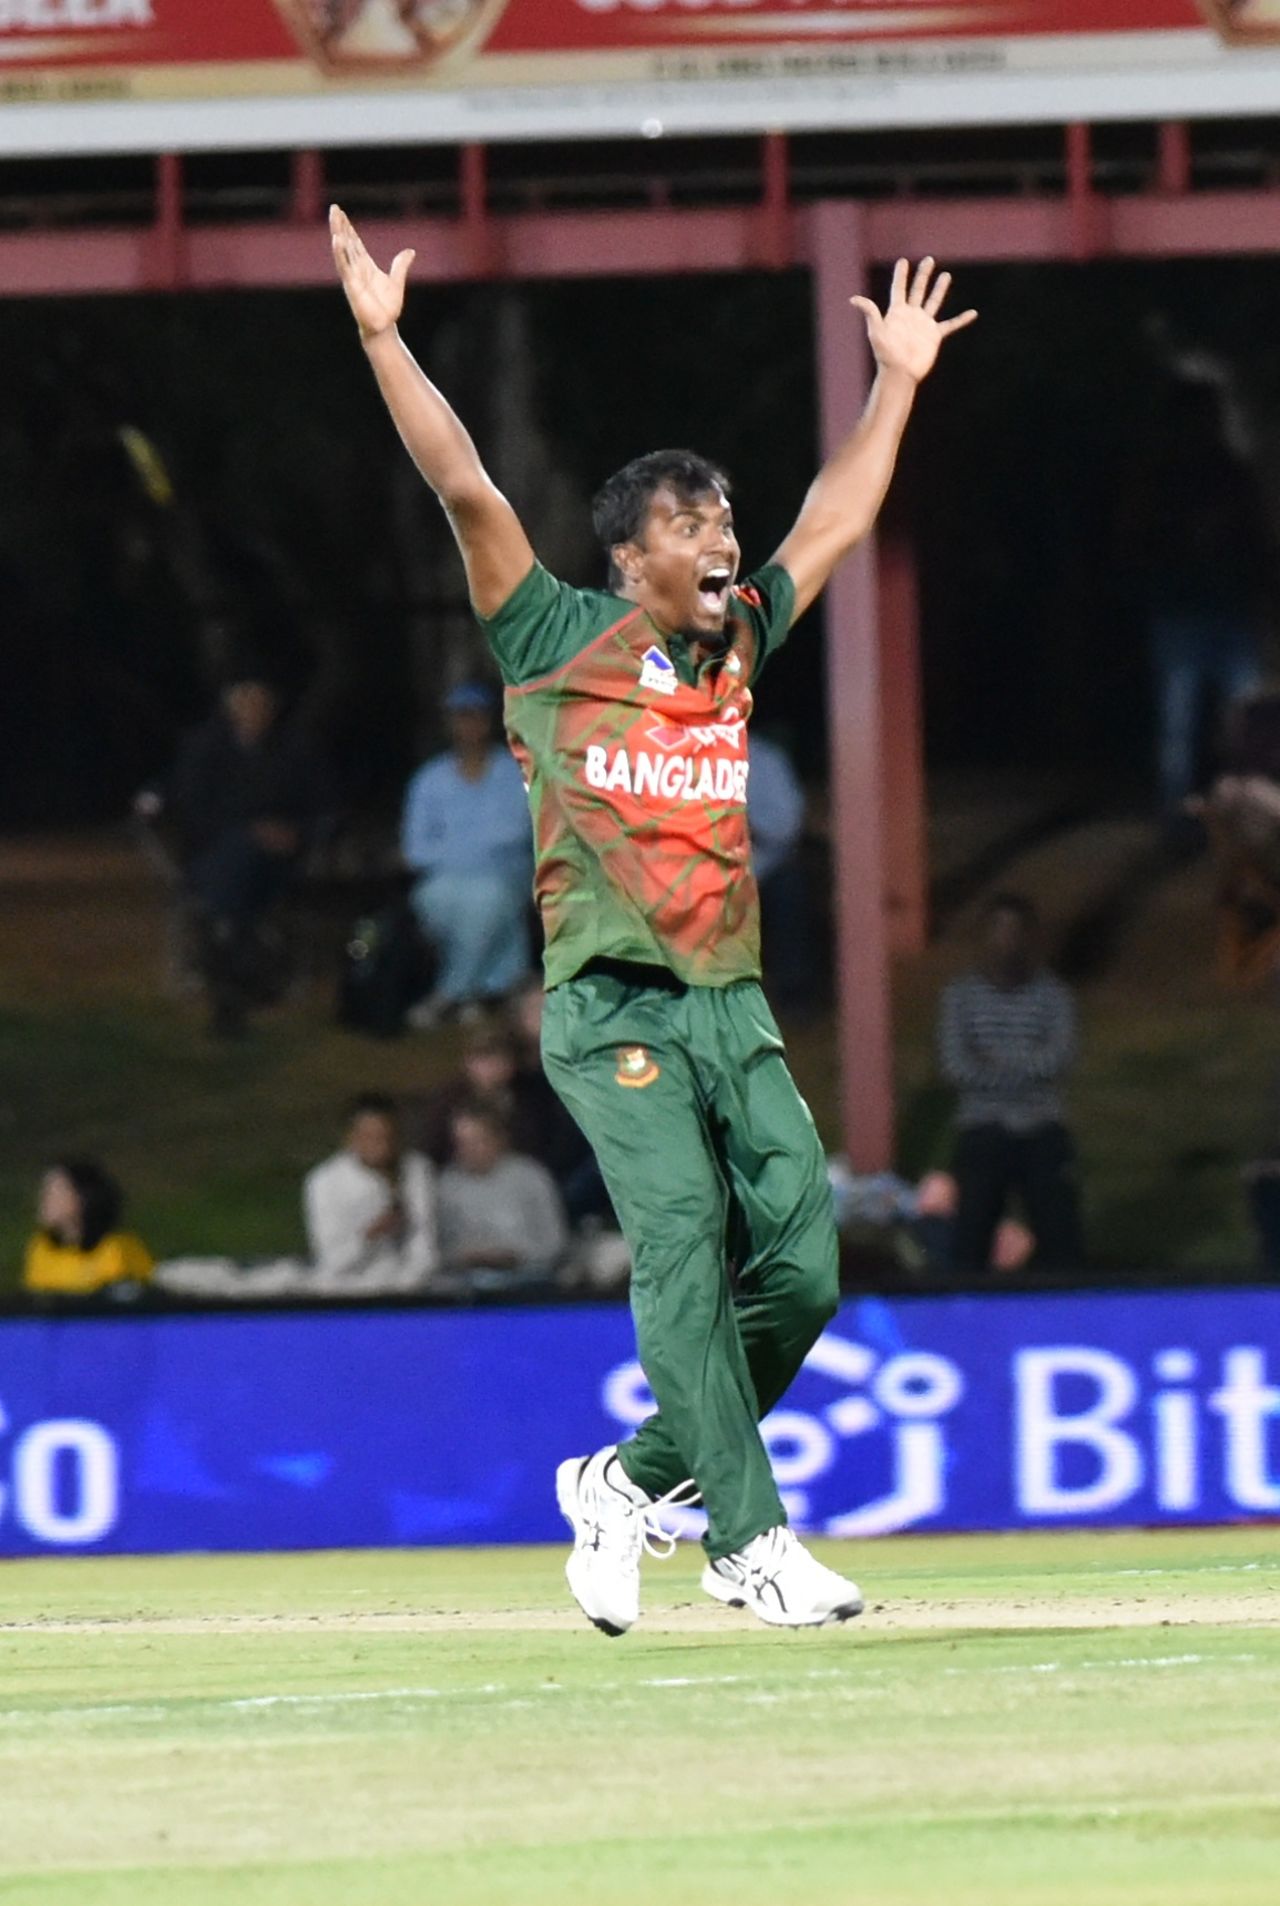 Rubel Hossain bowled some excellent yorkers, South Africa v Bangladesh, 1st T20I, Bloemfontein, October 26, 2017